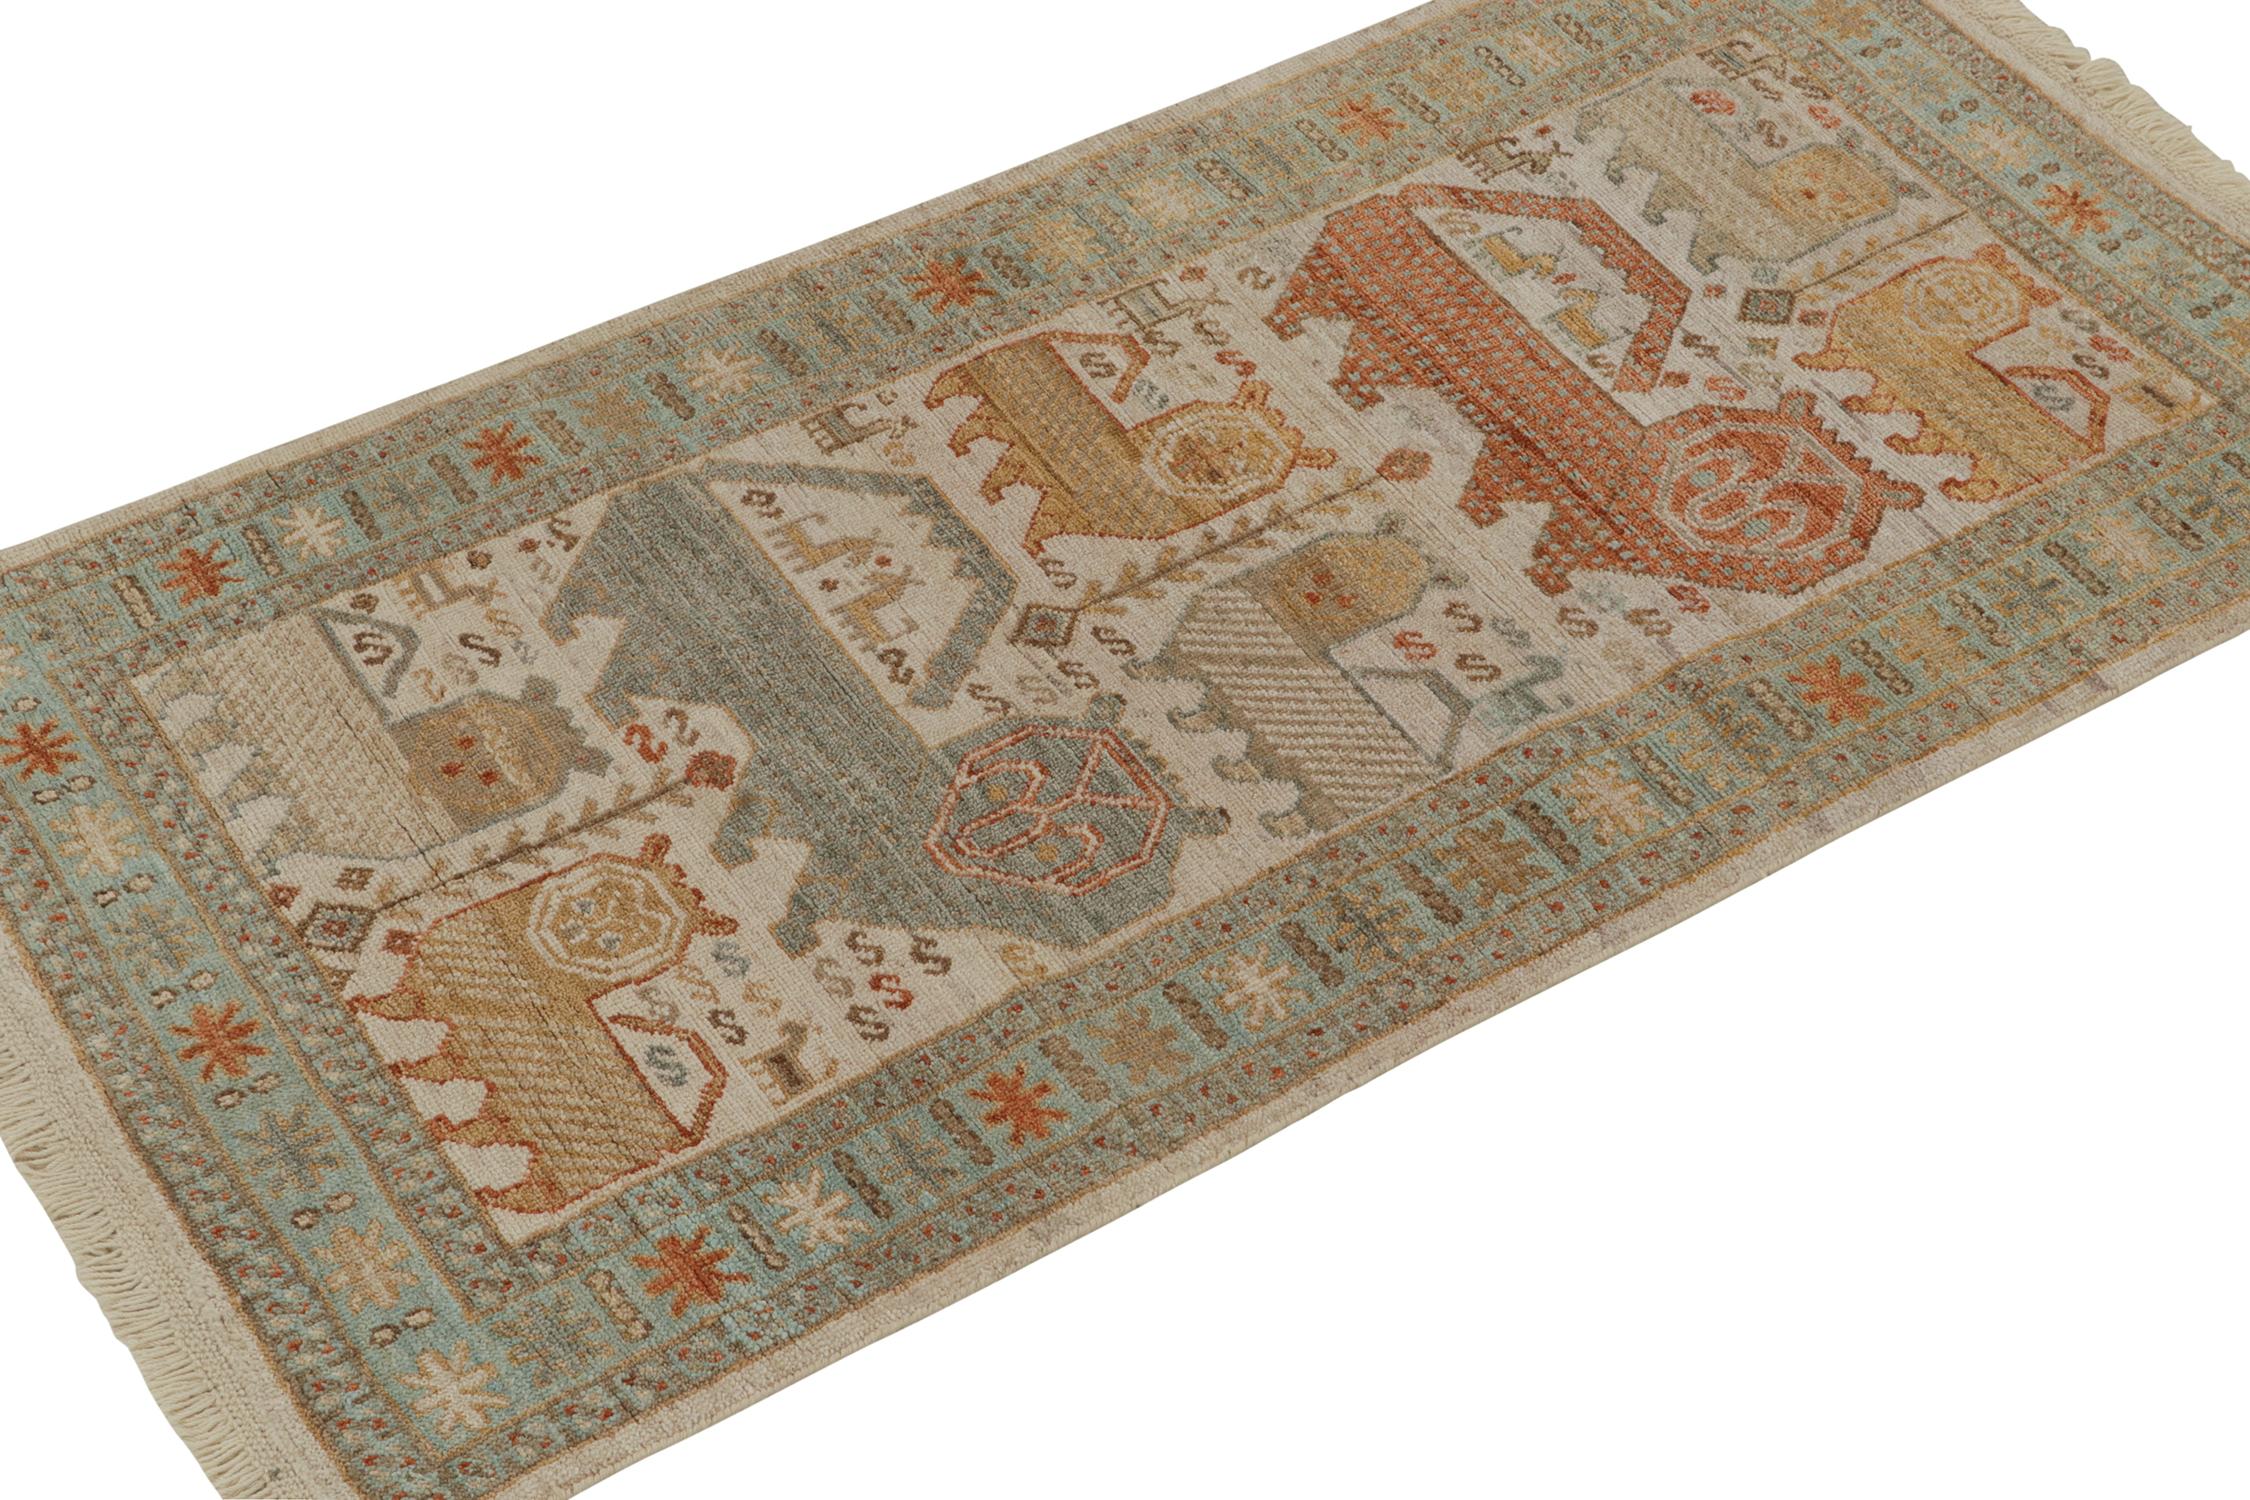 Hand-knotted in wool, a 3x6 ode to classic Caucasian rug aesthetics—from Rug & Kilim’s extensive Burano Collection. 

The carpet draws on tribal lion pictorials in warm, rusty red and light blue atop beige-brown. Keen-eyed connoisseurs will admire